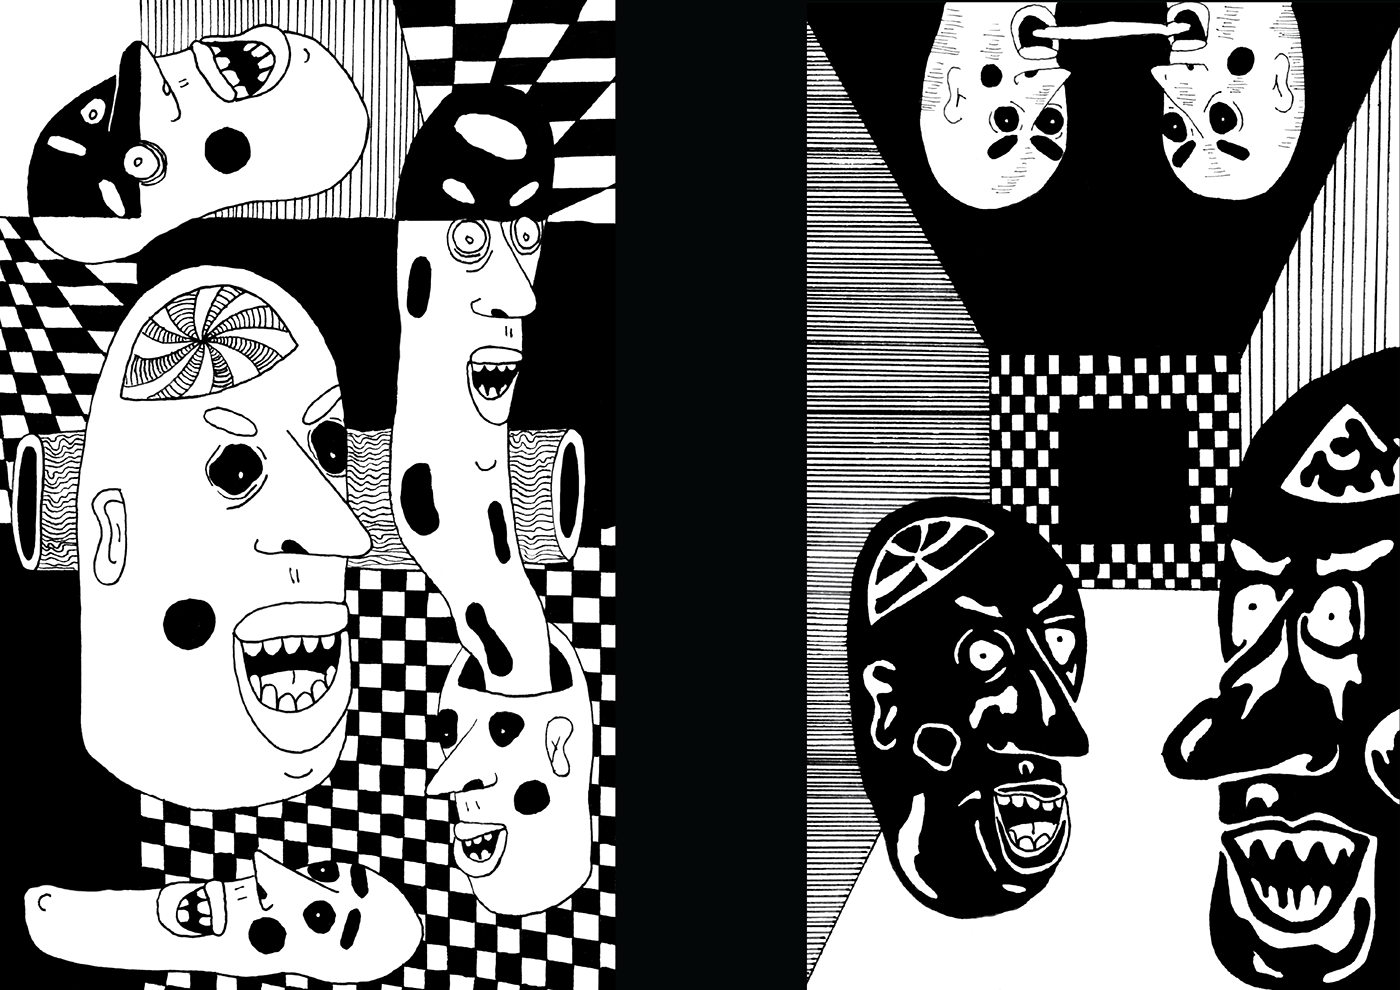 Character design  checkerboard pattern Drawing  ILLUSTRATION  Illustration Style monochrome illustration psychedelic surreal trippy weird illustration 